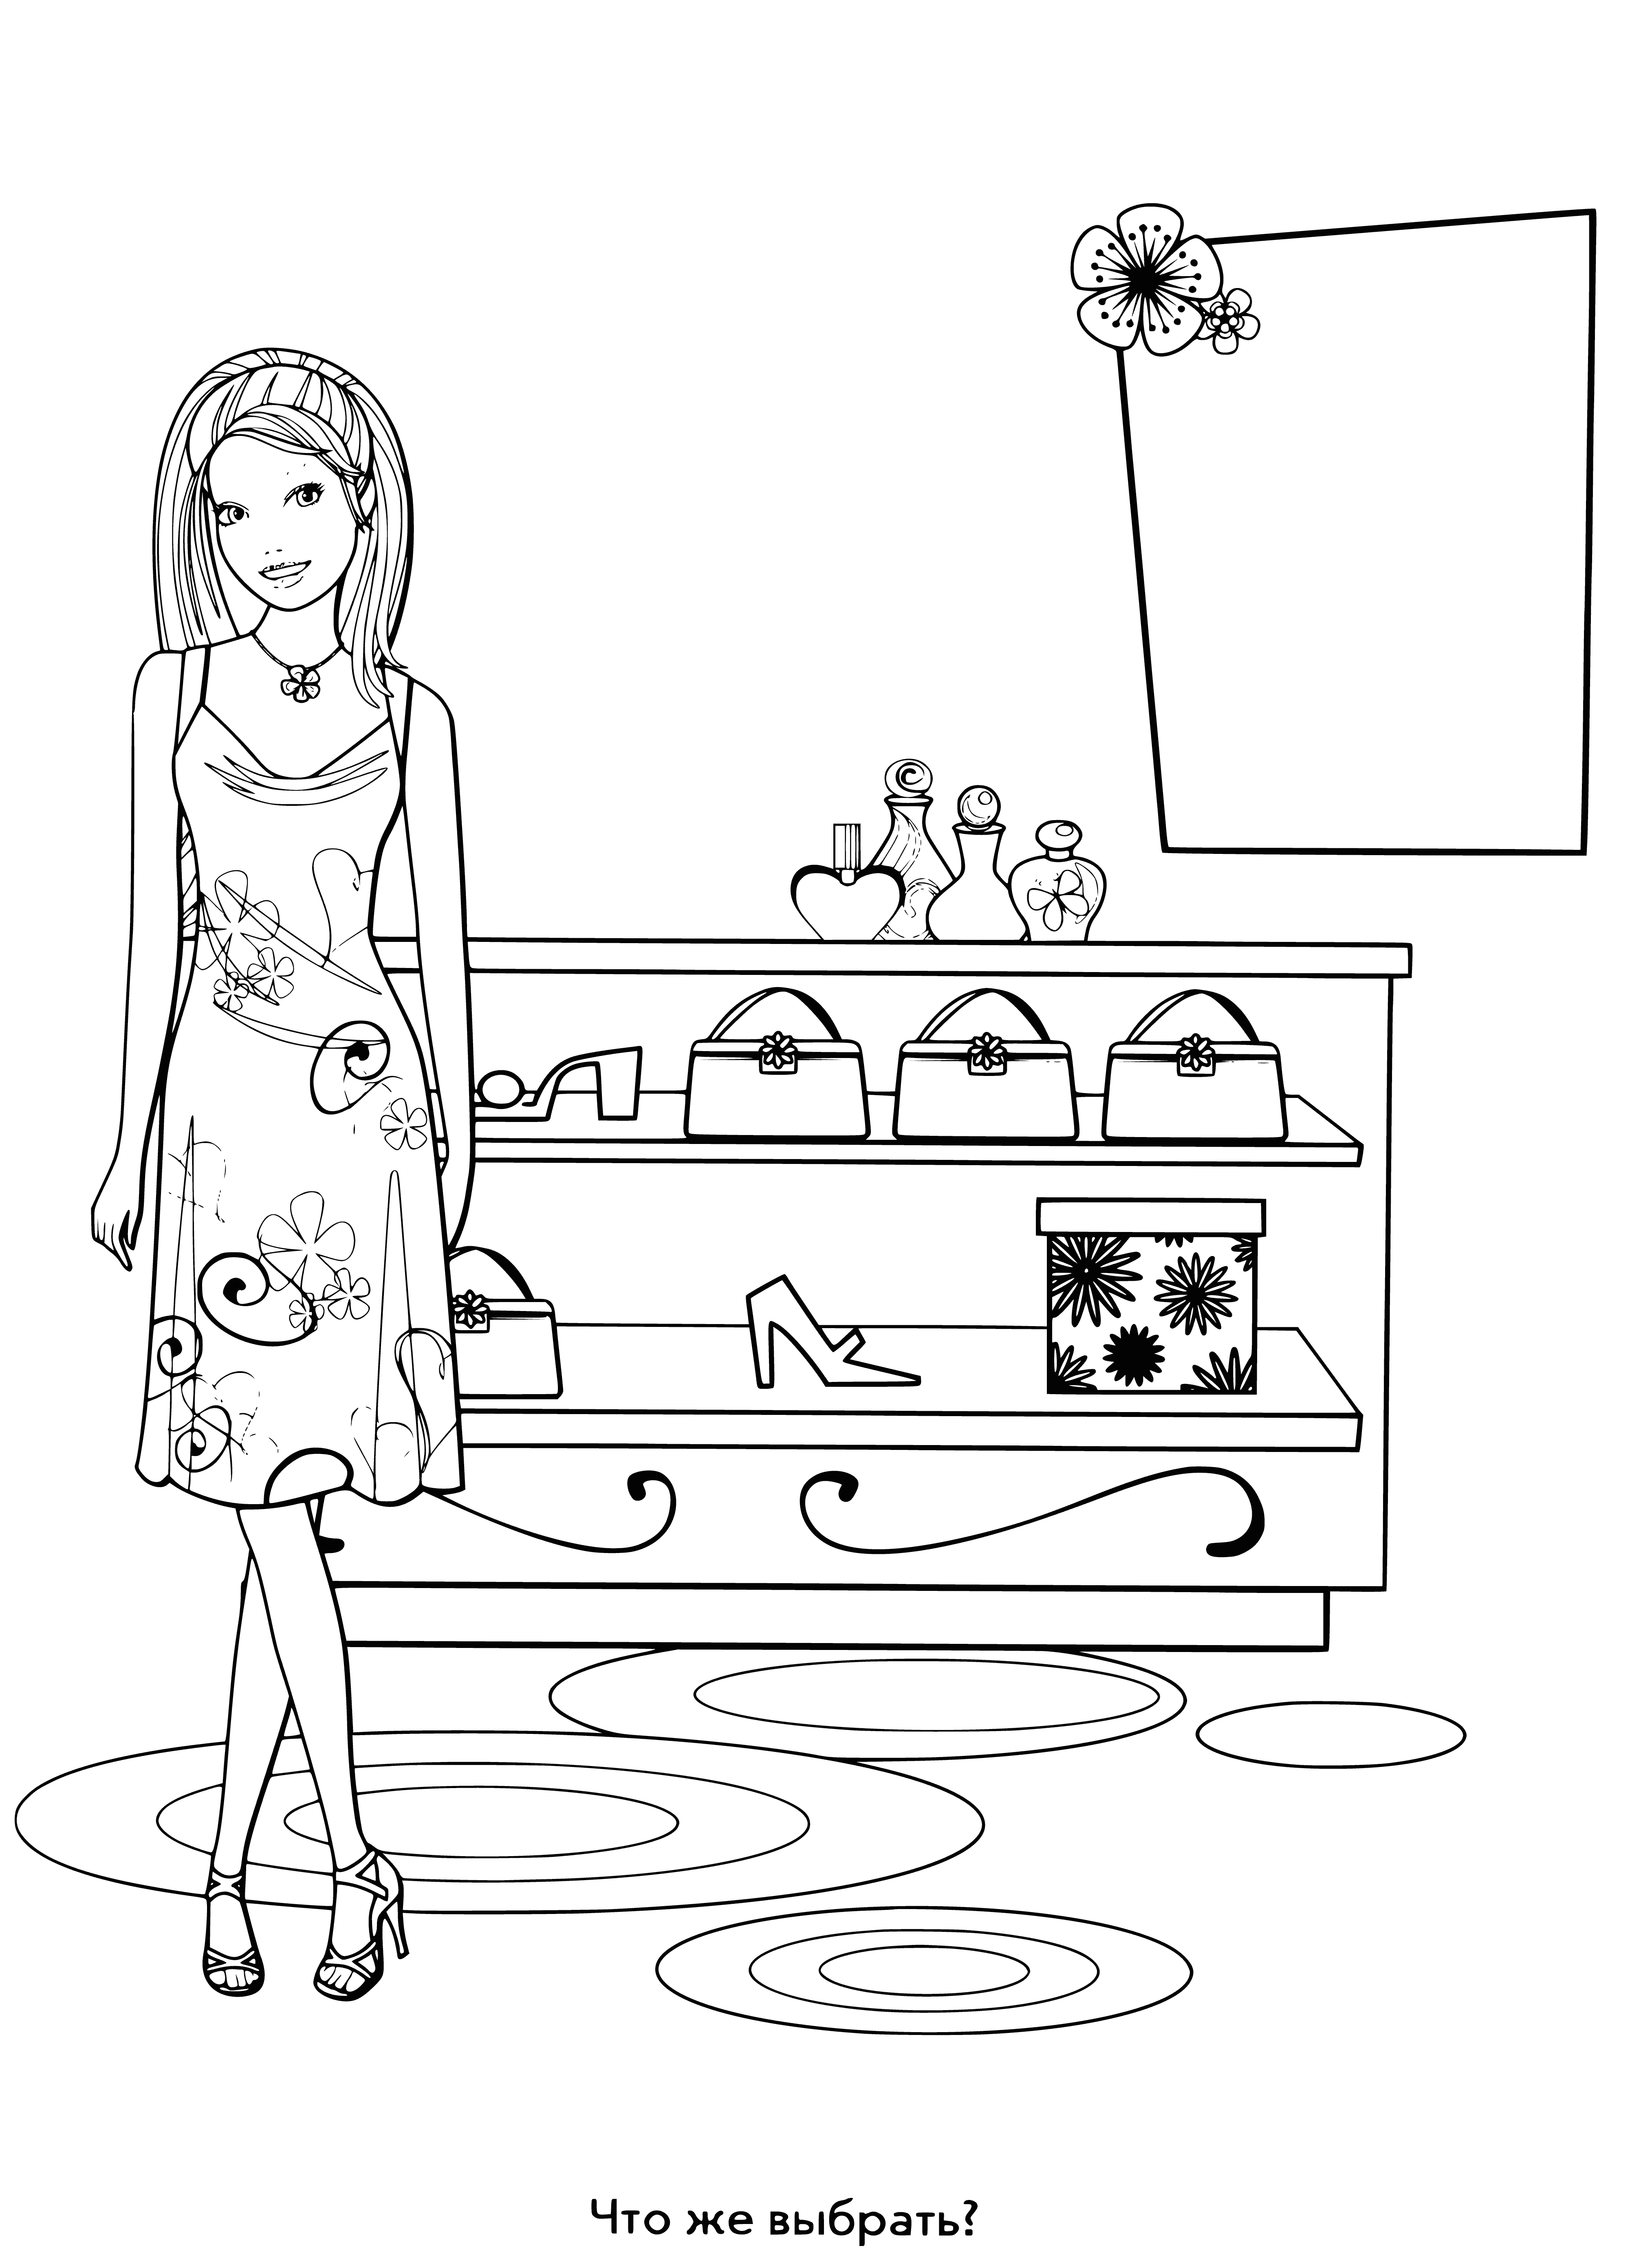 coloring page: Barbie ponders between black flats & white sandals w/gold strap, thinkingfully examining them both.